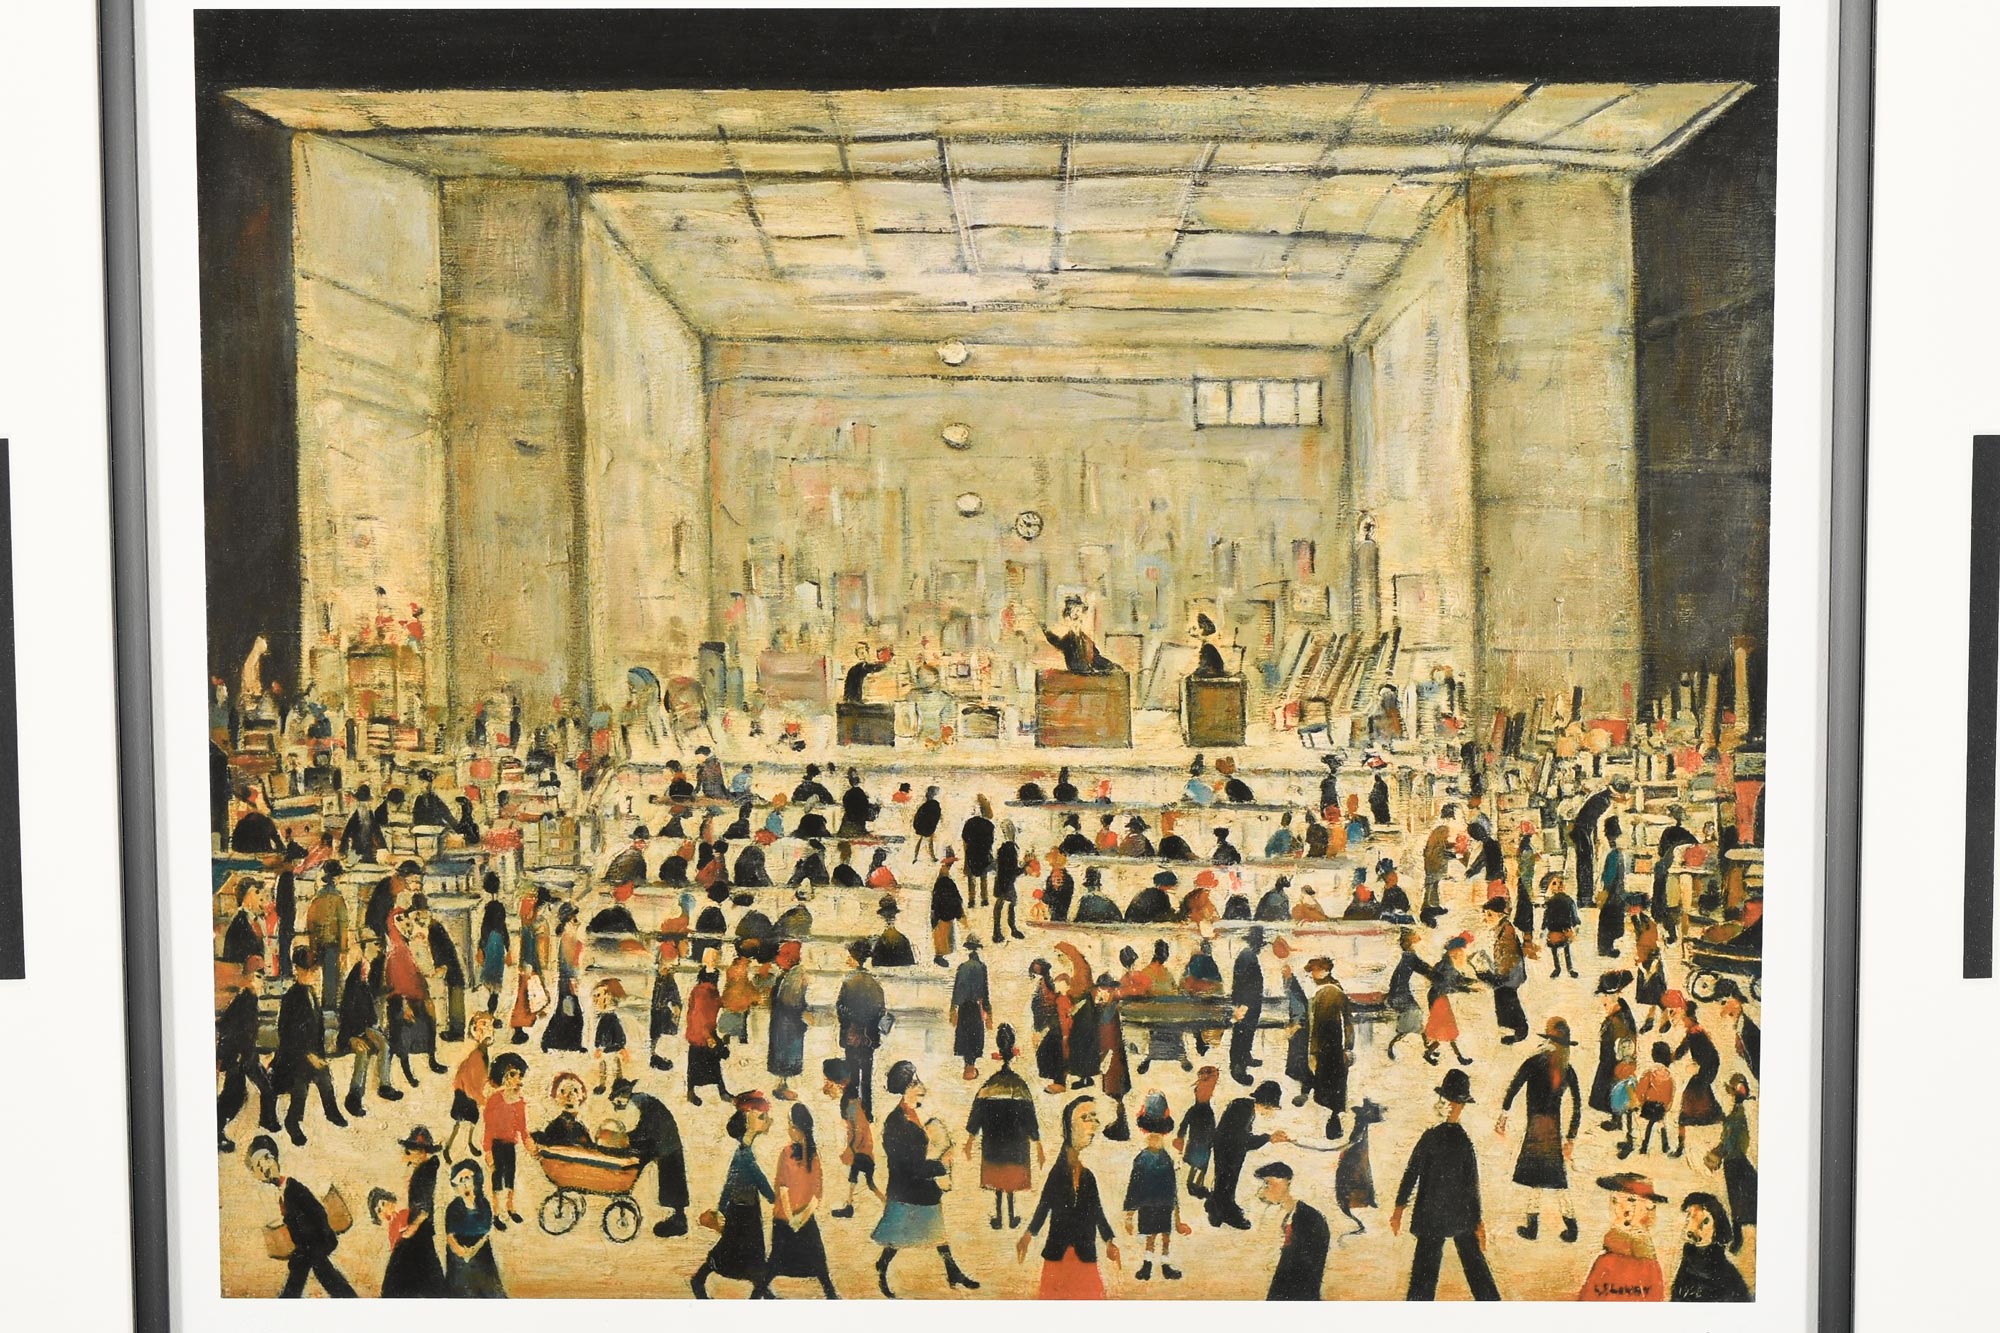 L.S. Lowry Limited Edition "The Auction" - Image 3 of 10